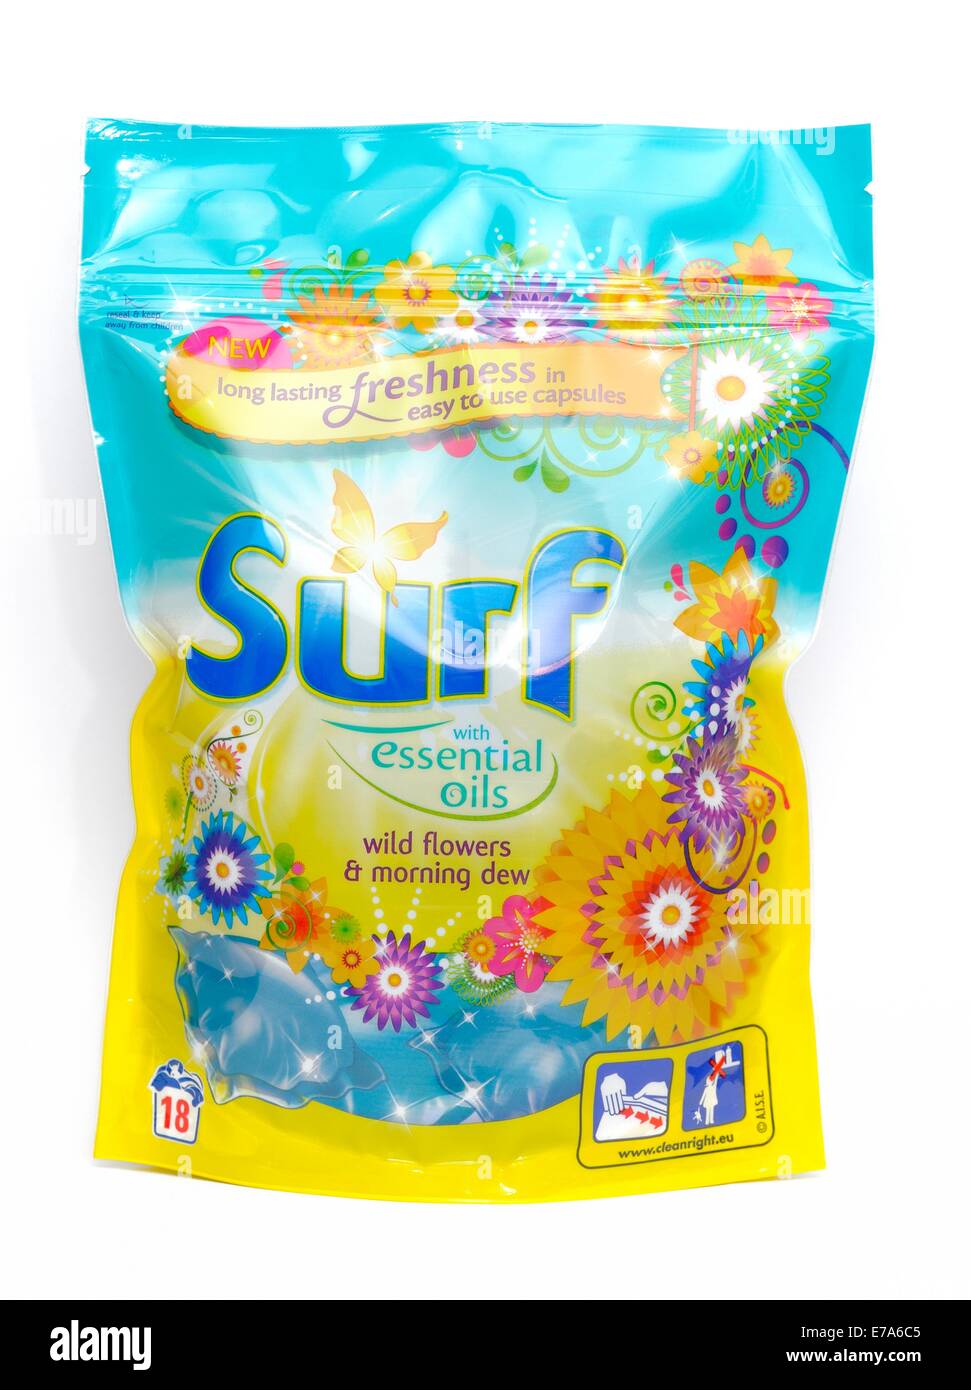 A bag of 18 Surf clothes washing capsules with essential oils wild flowers and morning dew england uk Stock Photo